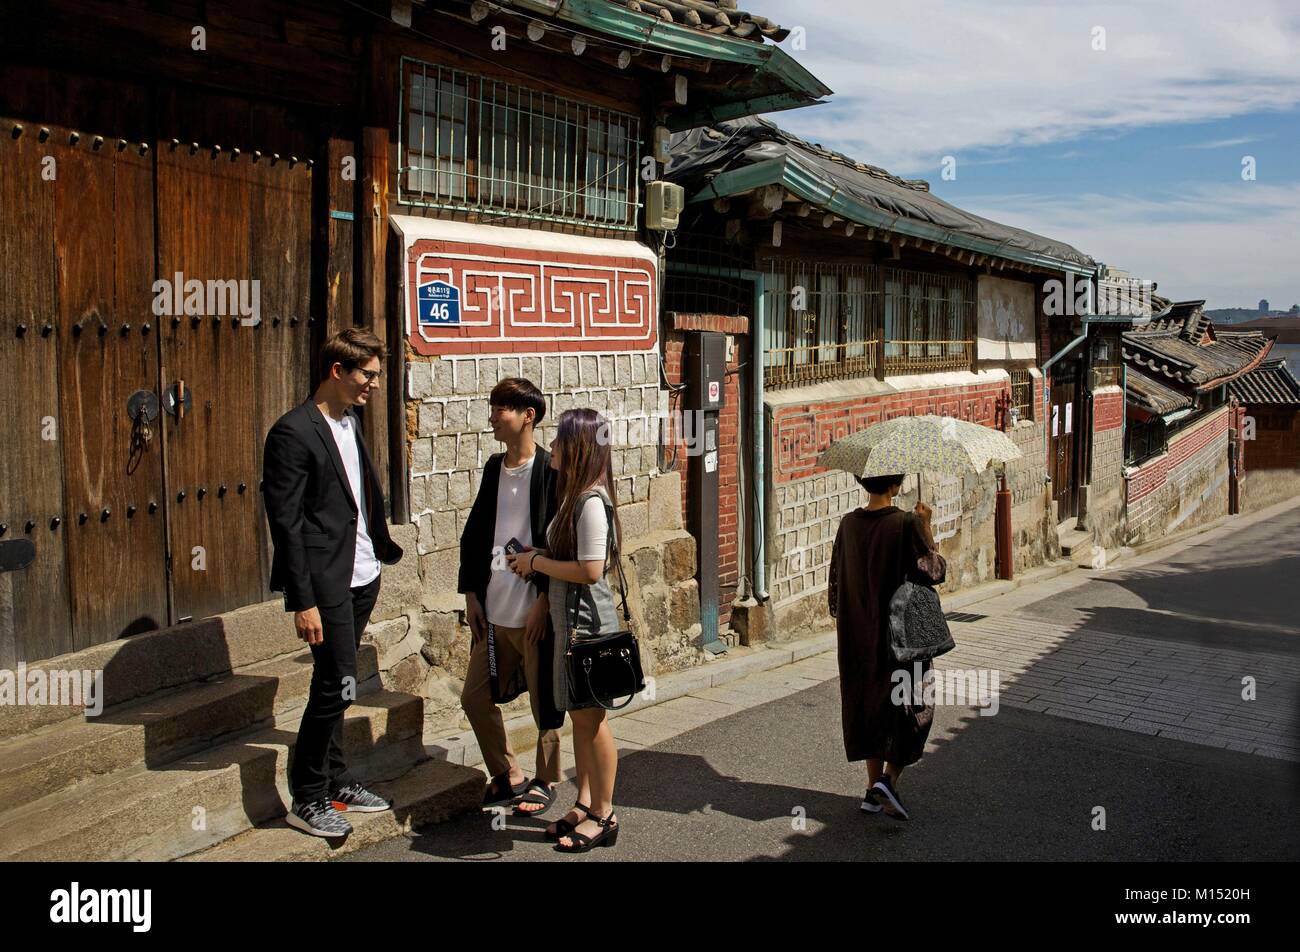 South Korea, Seoul, Fabien Yoon, french star of korean medias withs groupies in an alley of the old district Bukchon hanok village Stock Photo